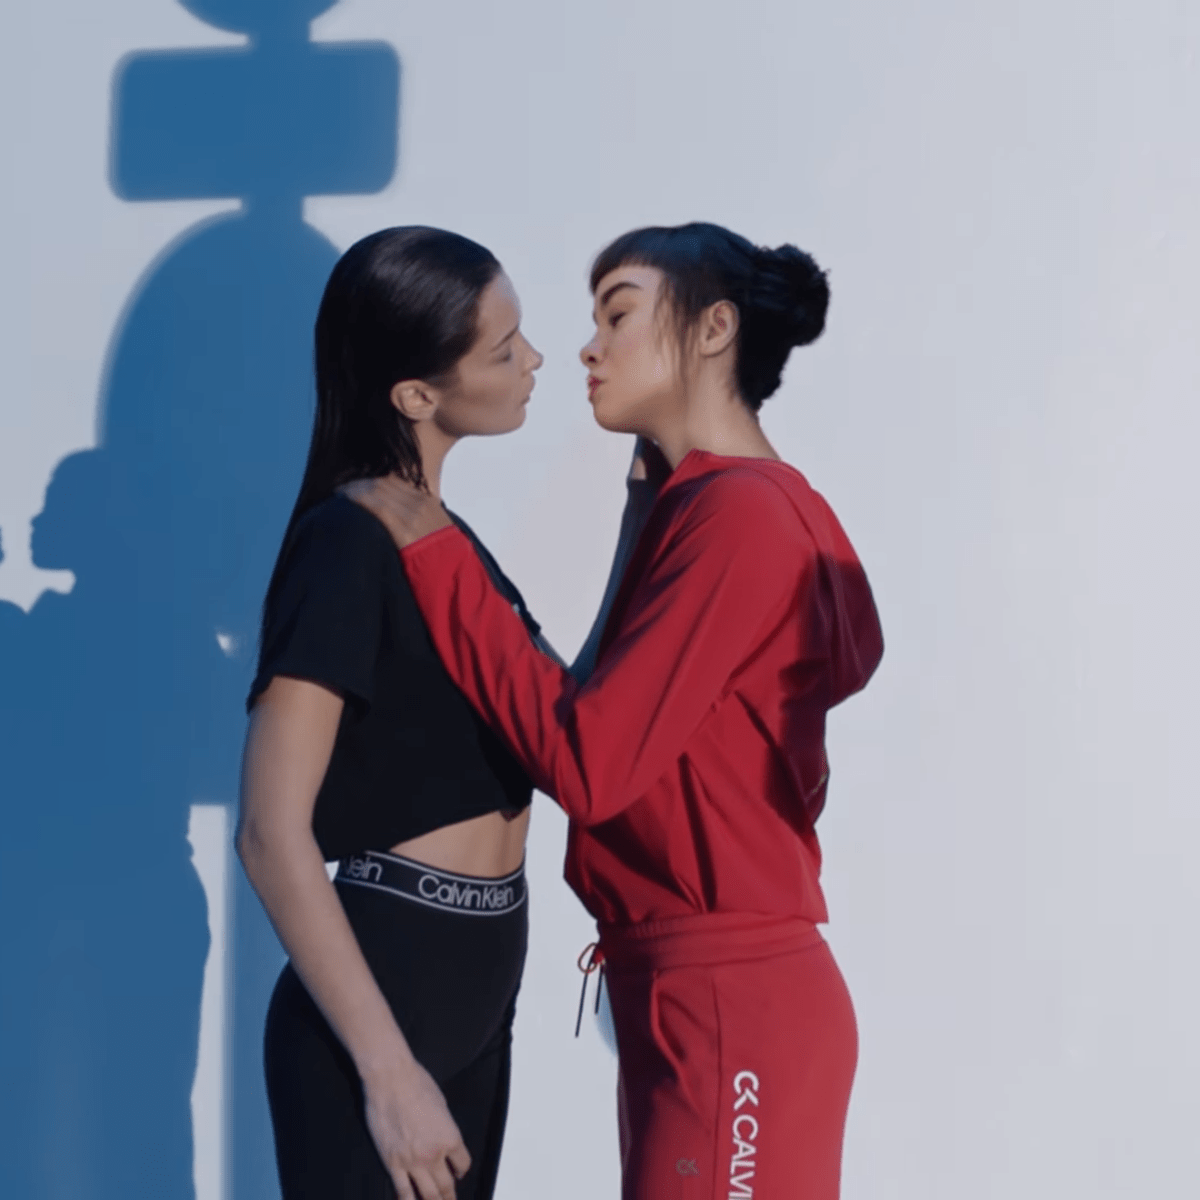 Must Read: Calvin Klein Responds to Backlash Over Bella Hadid/Lil Miquela  Video, a First Look at Rihanna's Luxury Line, Fenty - Fashionista